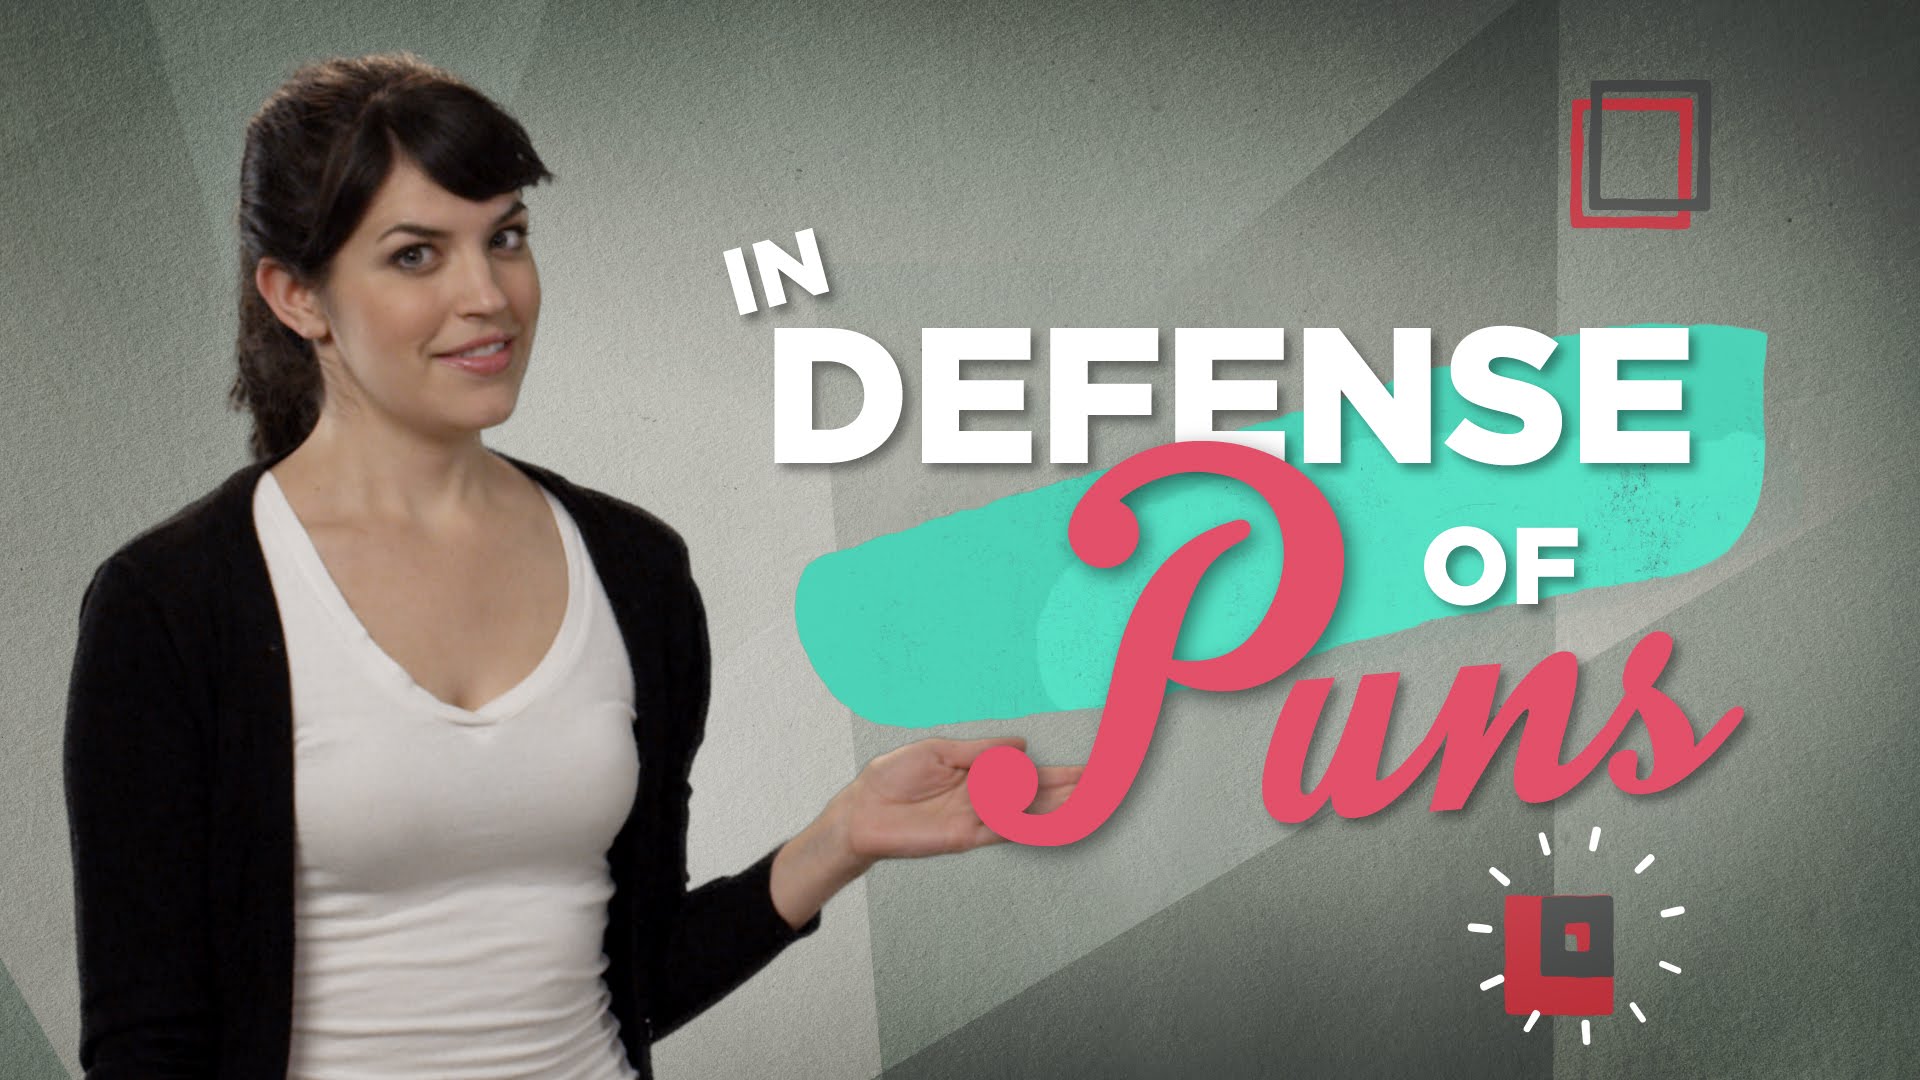 In a recent video by CollegeHumor, Emily Axford makes a staunch and